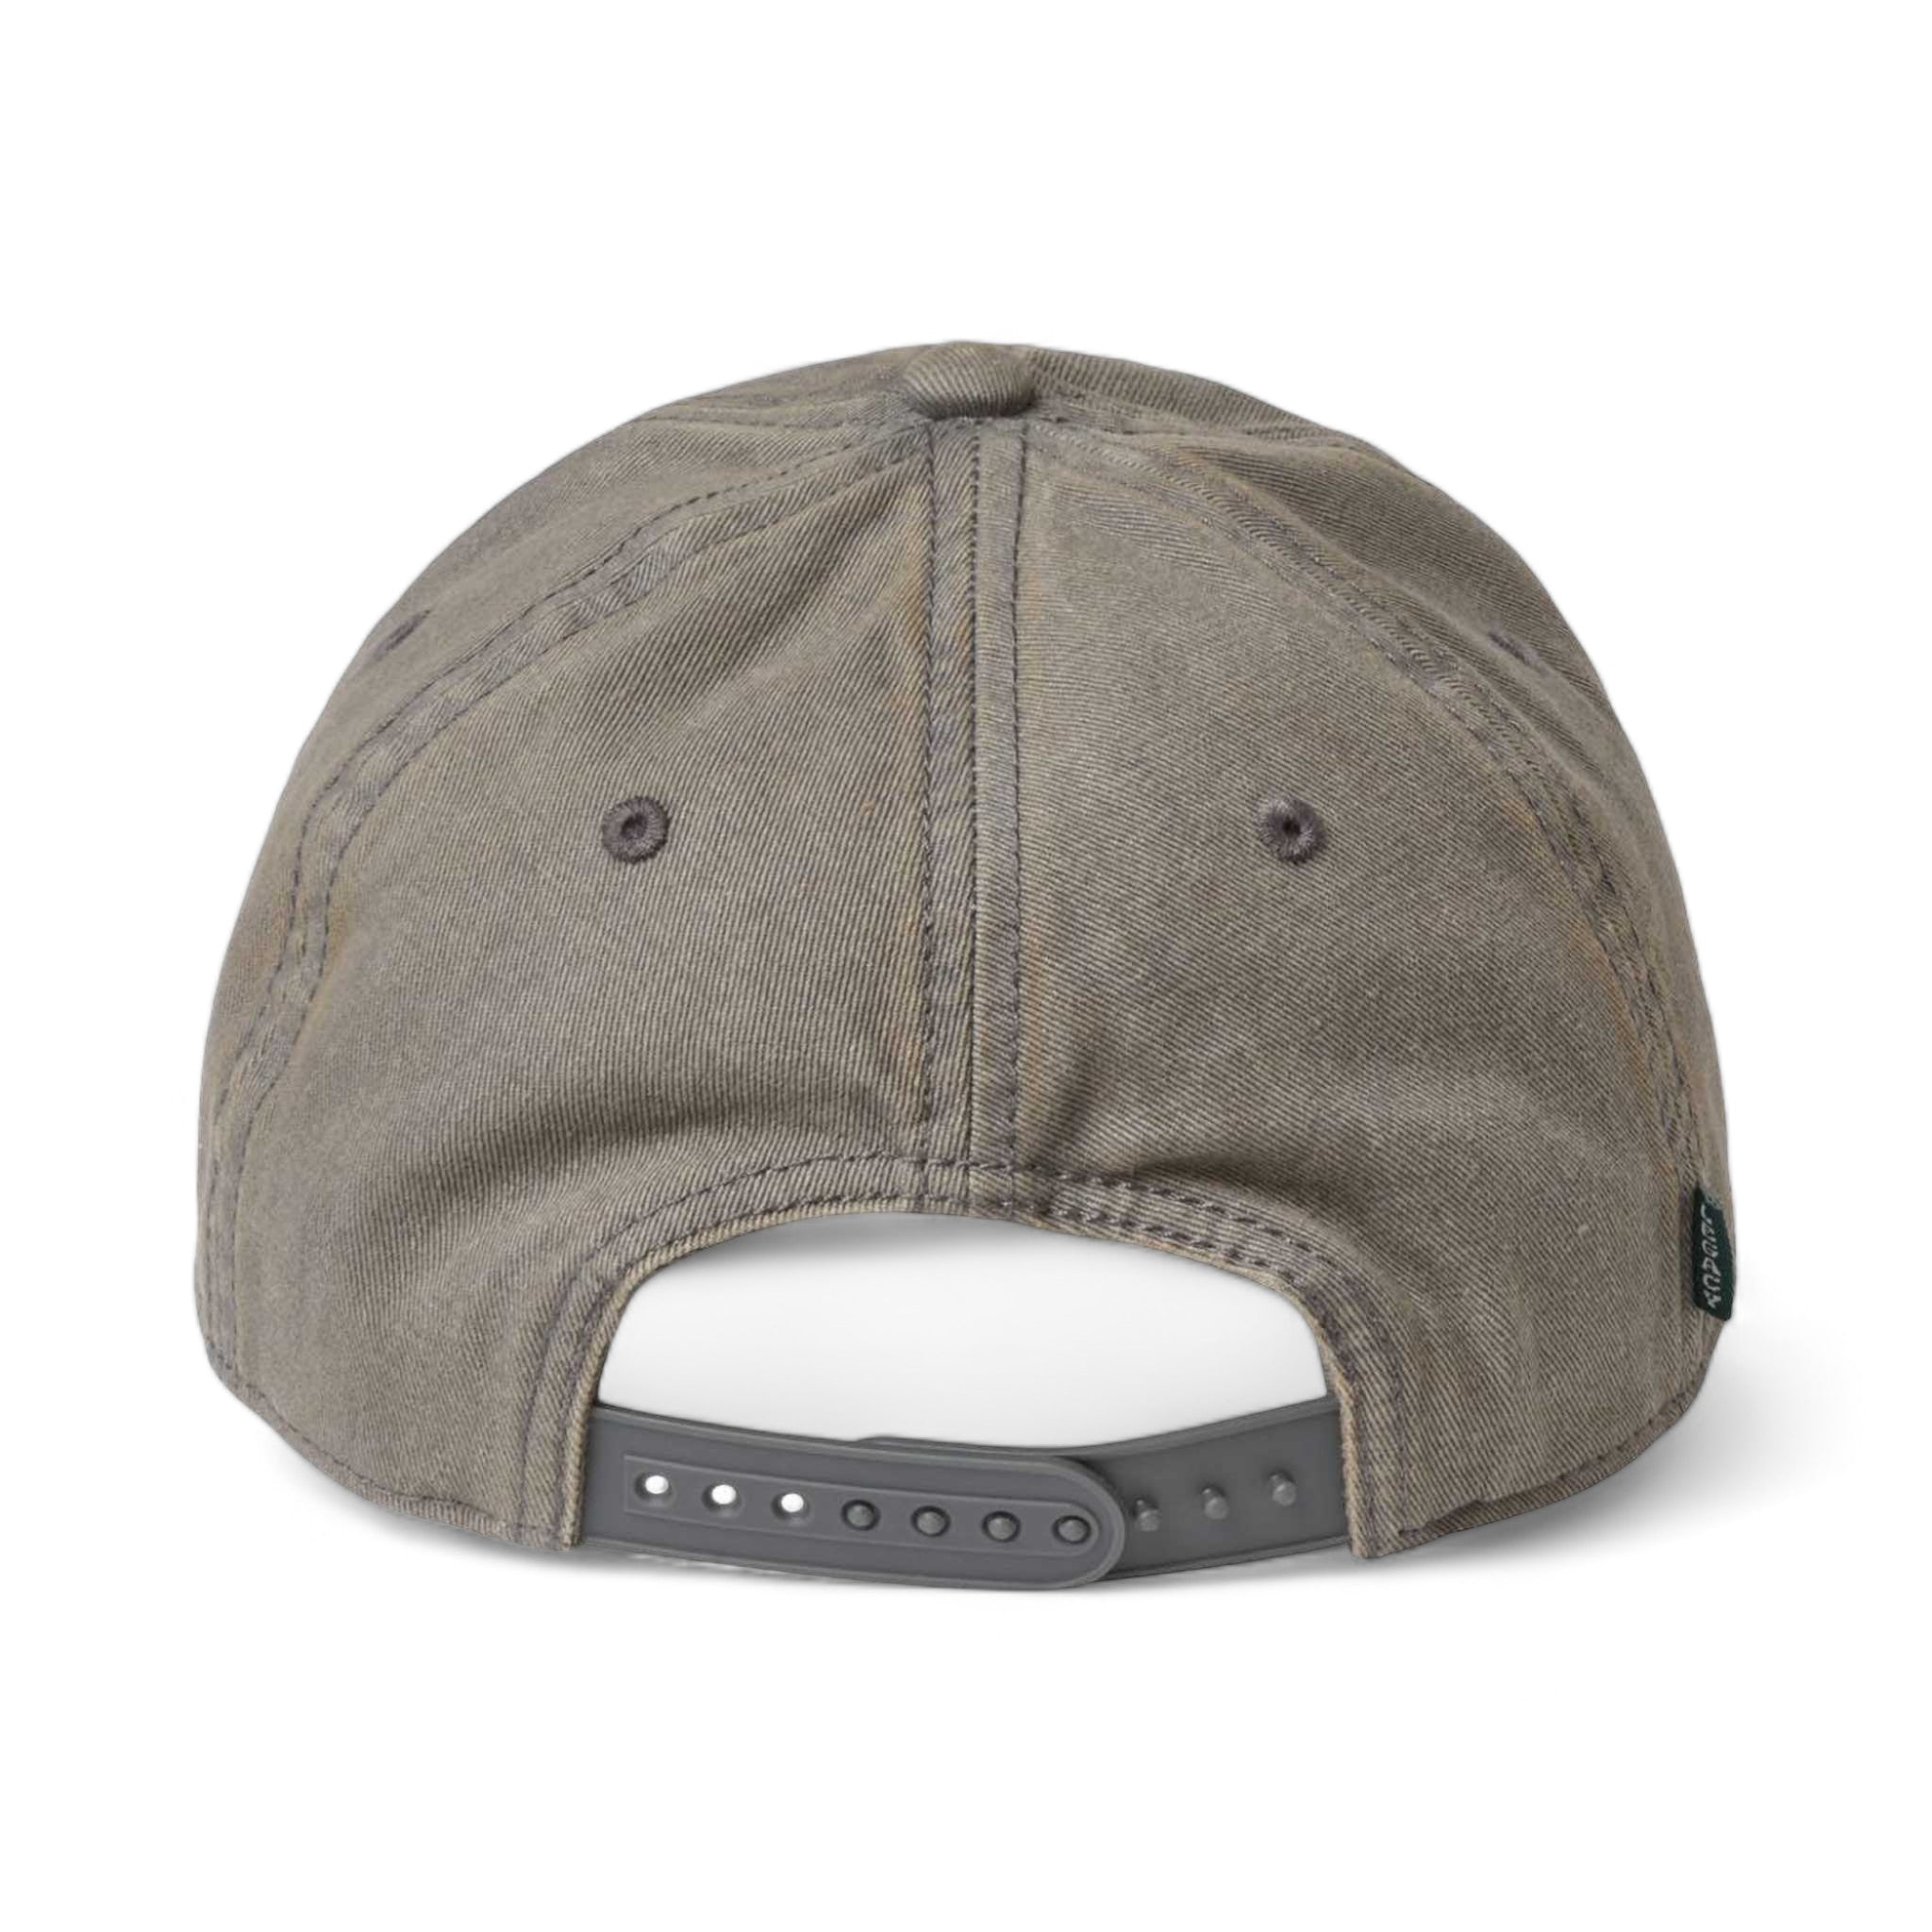 Back view of LEGACY OFAST custom hat in grey